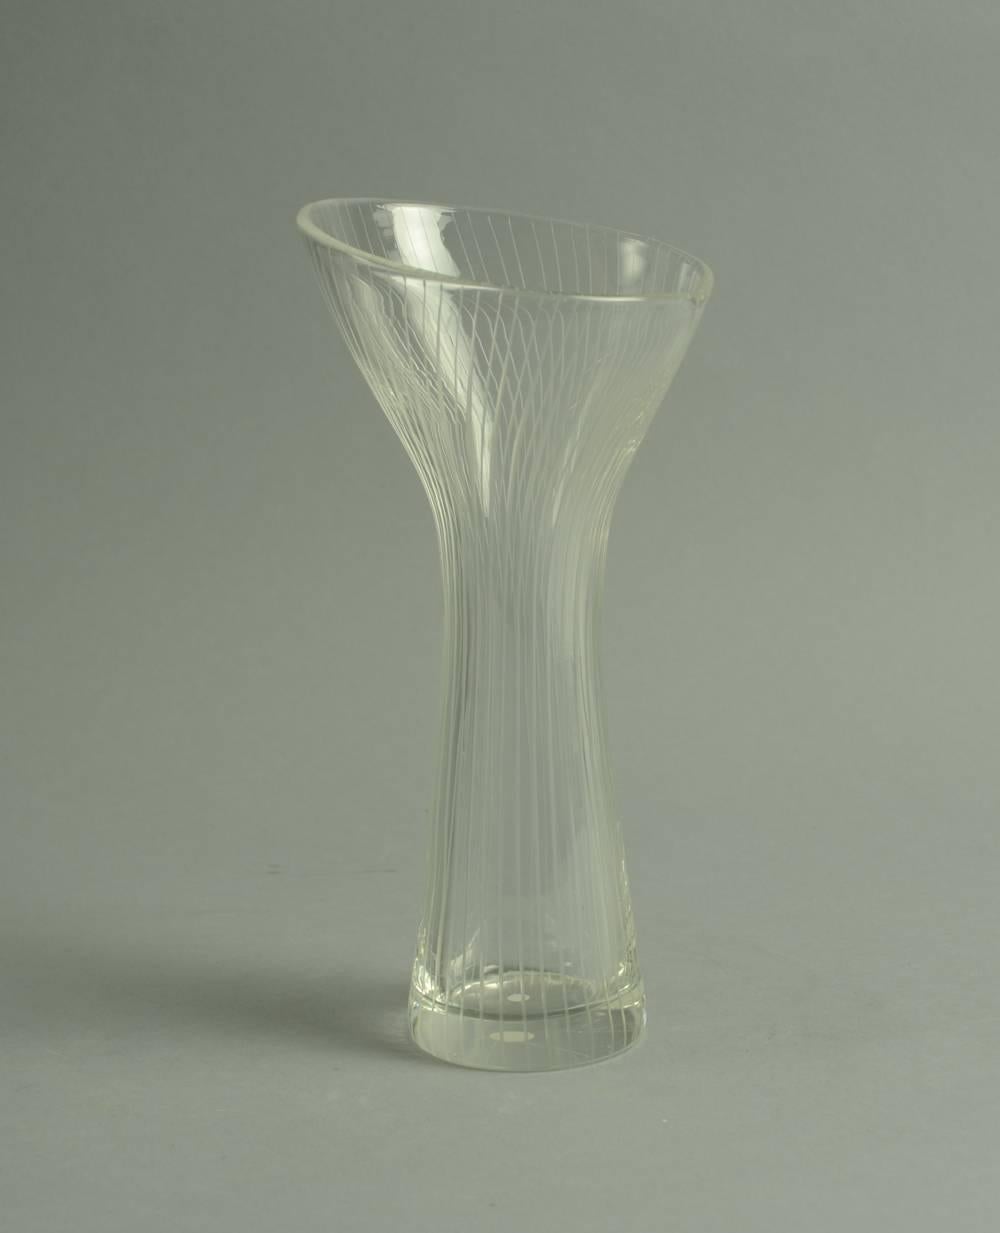 Three Engraved Vases by Tapio Wirkkala for Iittala In Excellent Condition For Sale In New York, NY